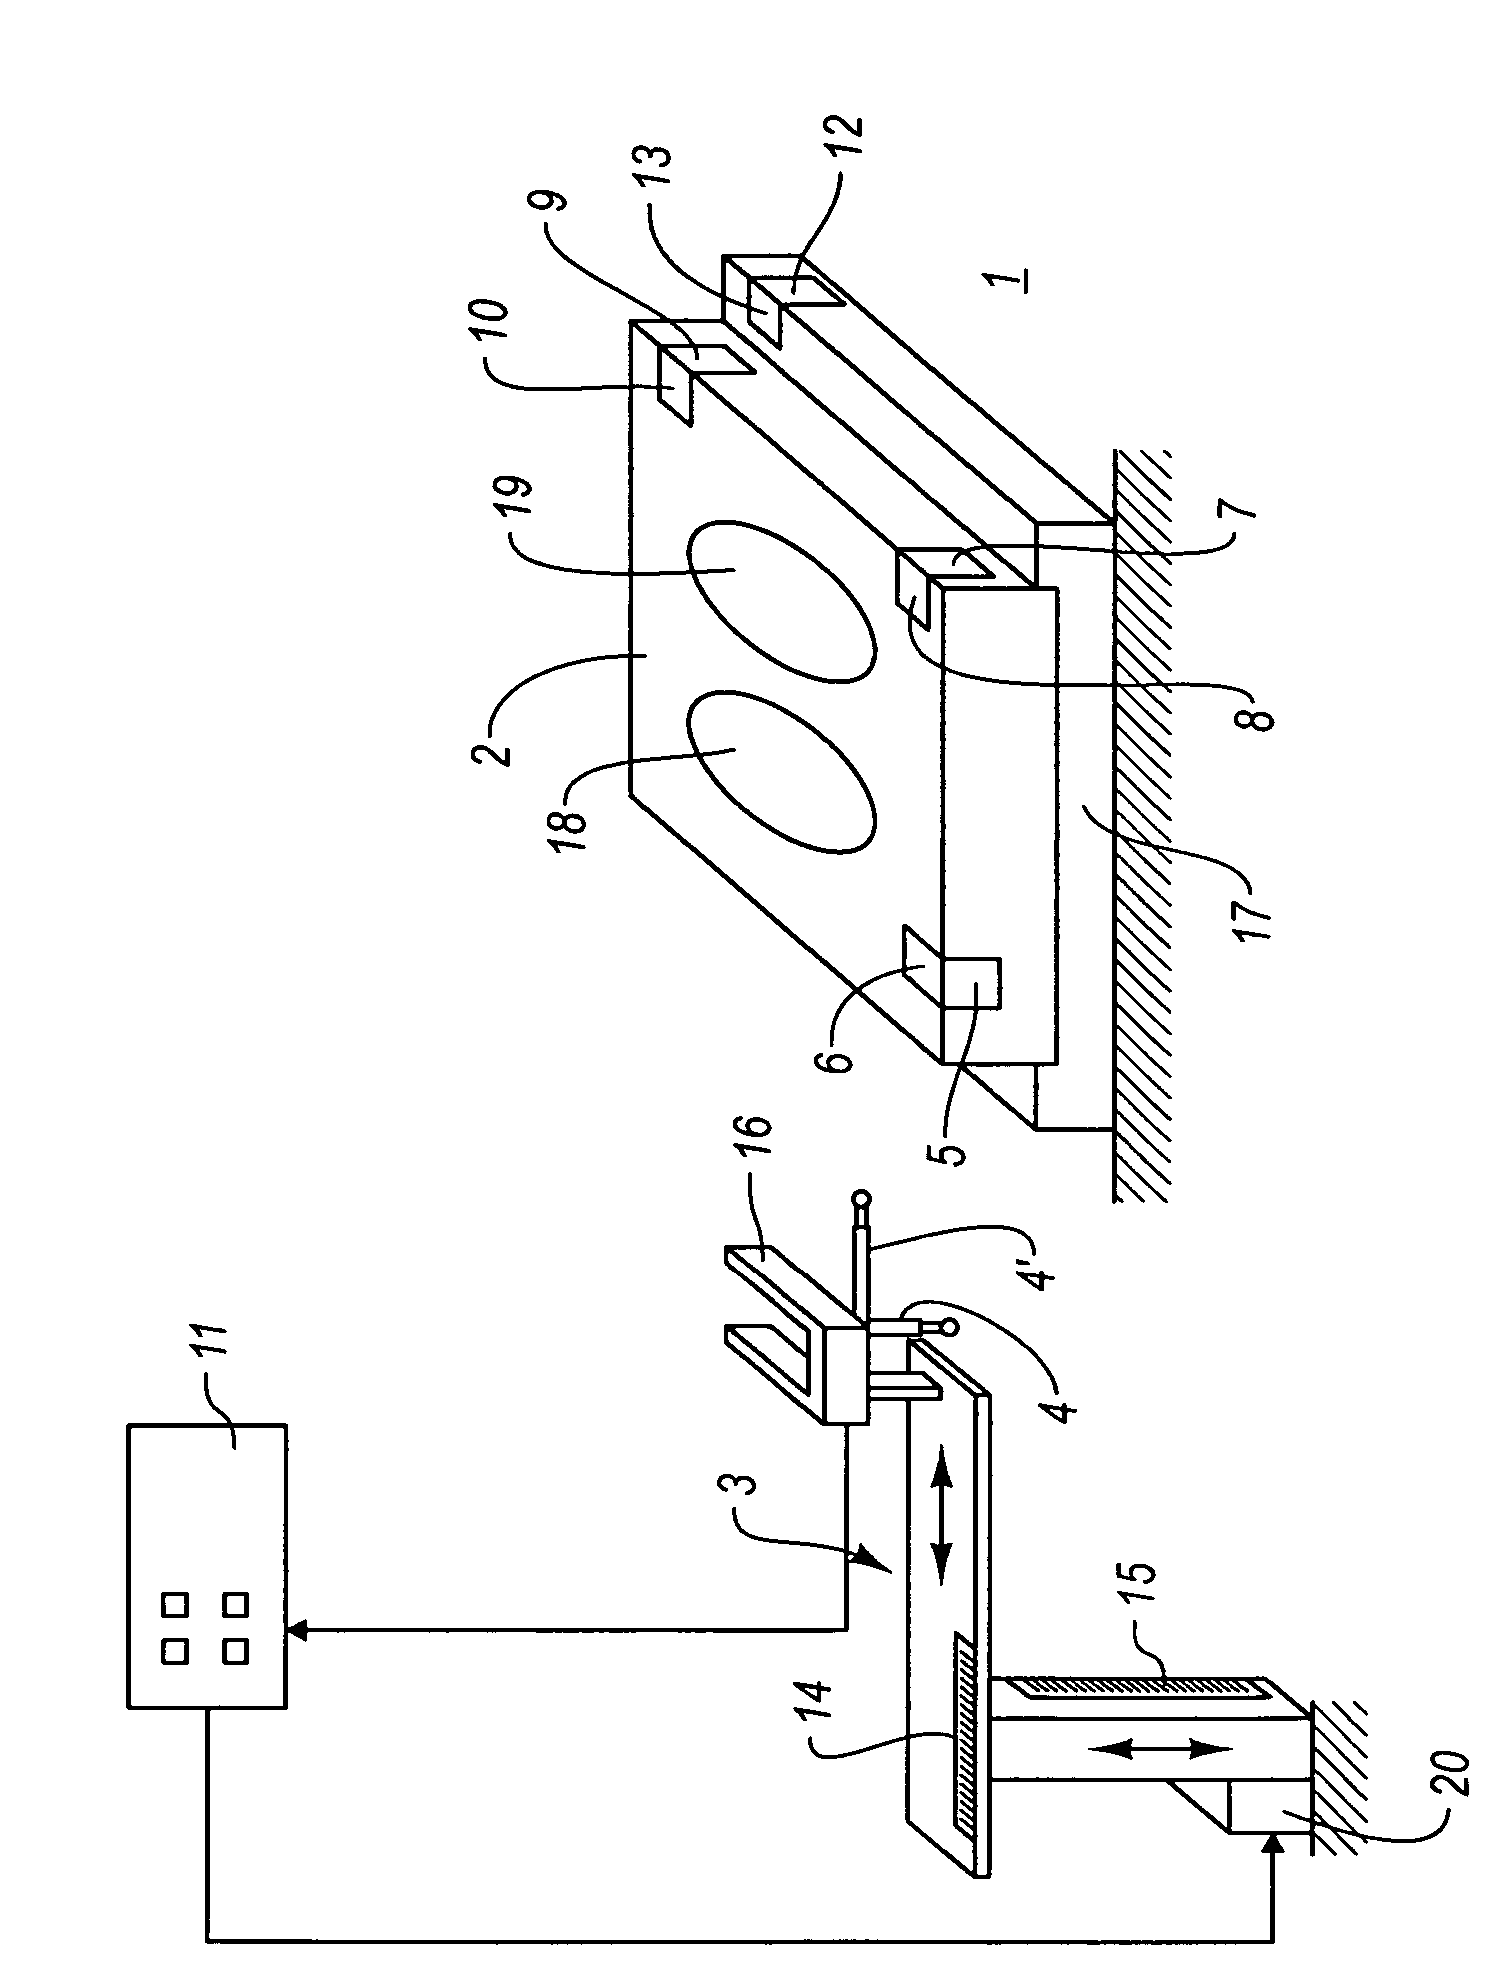 Method and device for shaping workpieces